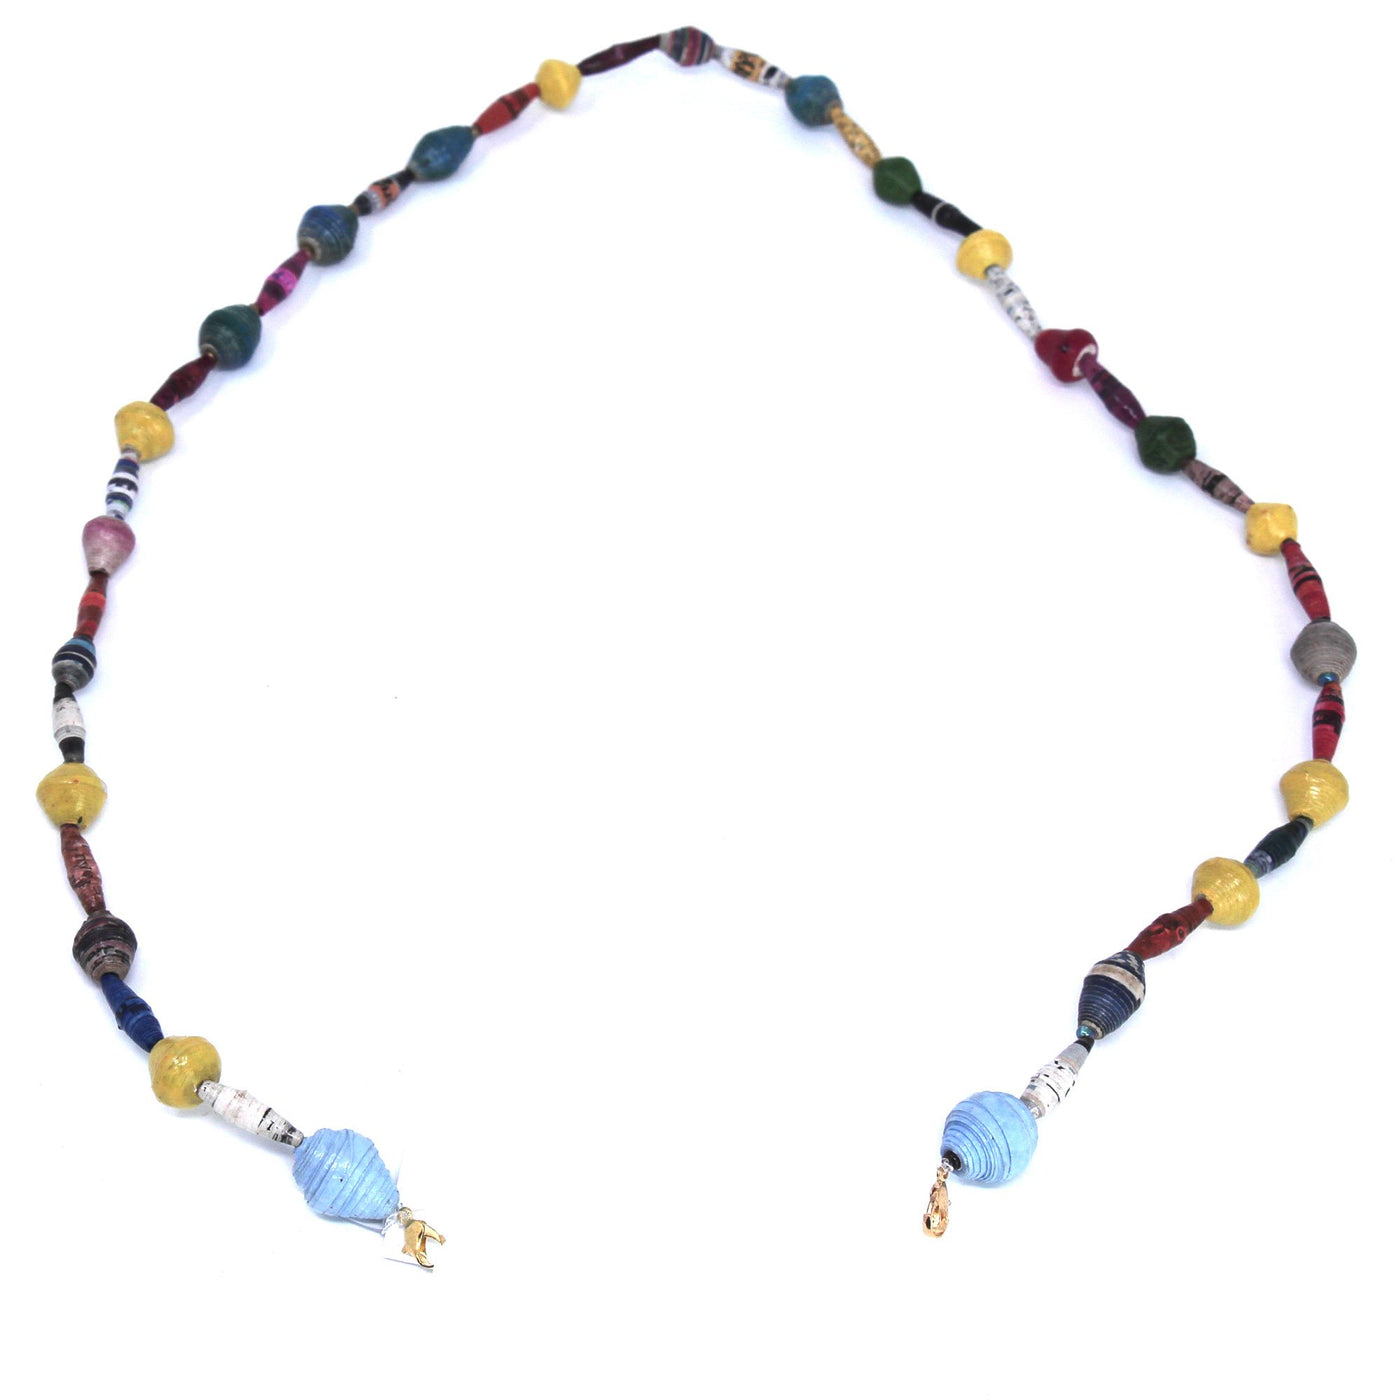 Face Mask/Eyeglass Paper Bead Chain, Colorful Mixed Shapes - Yvonne’s 100th Wish Inc